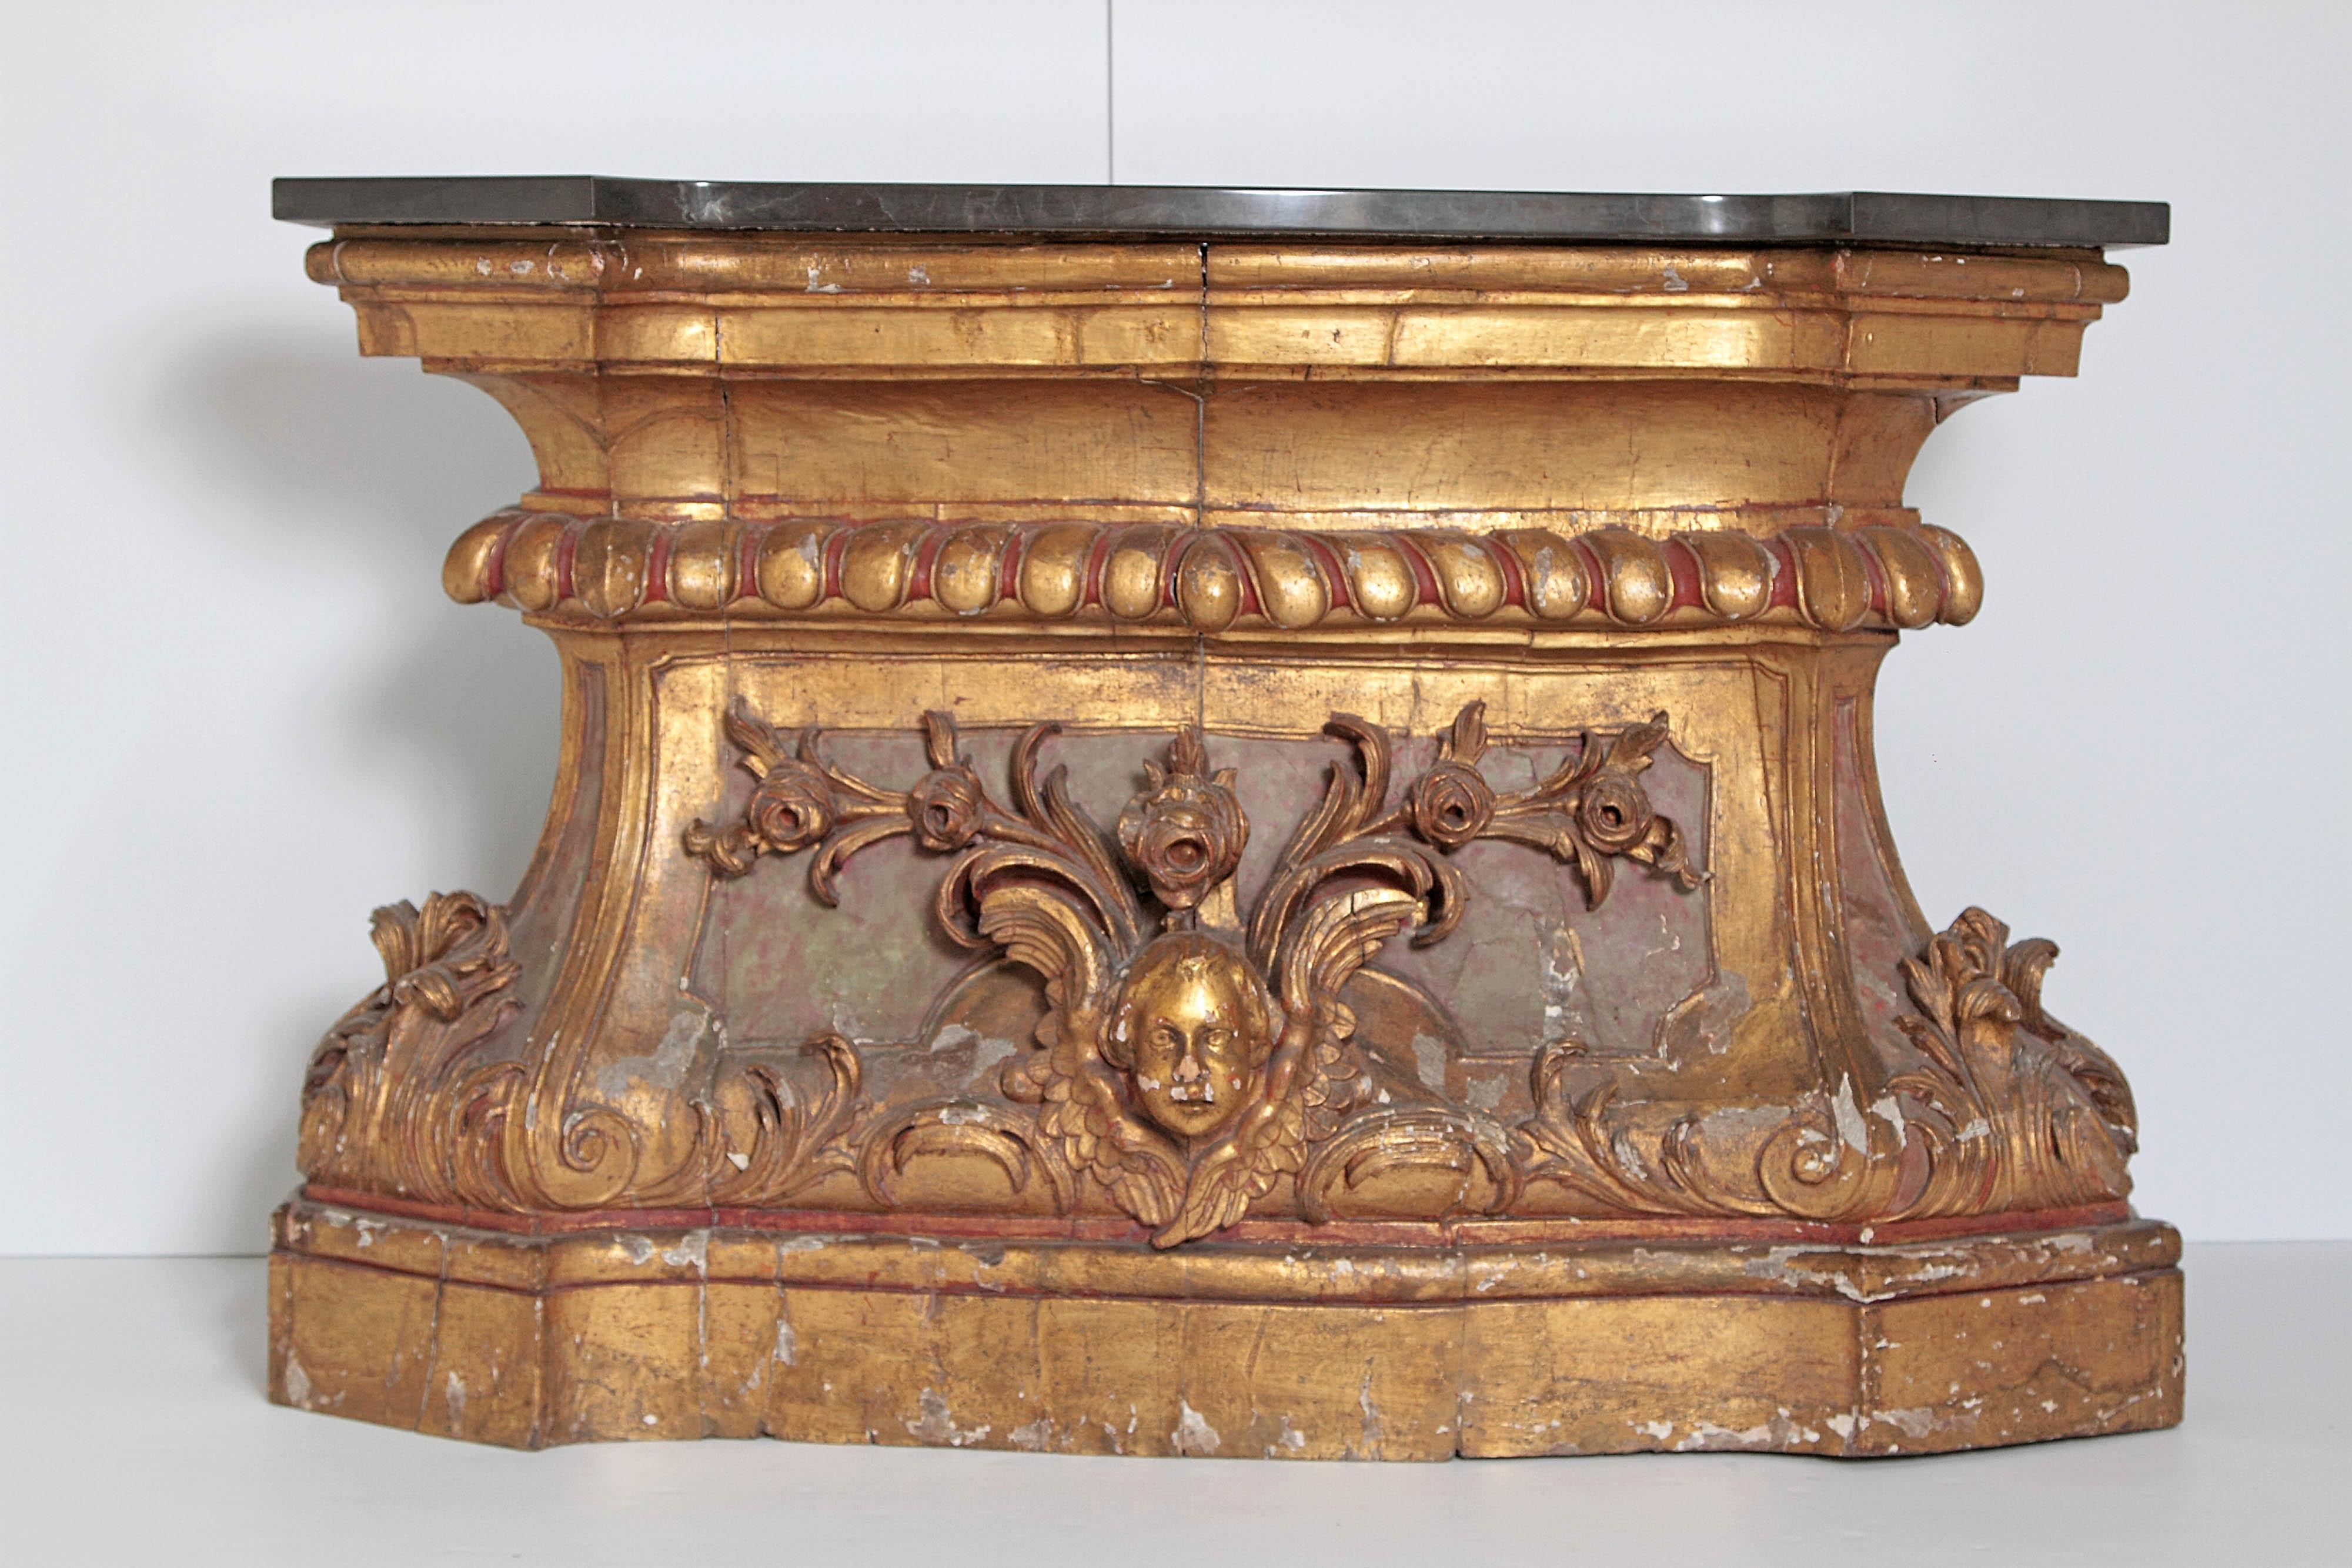 A large mid-18th century Italian gilded and poly-chromed architectural fragment used as a console with later black marble top, shaped base and top, angel face with floral spray on centre of base, mid-18th century, Italy.